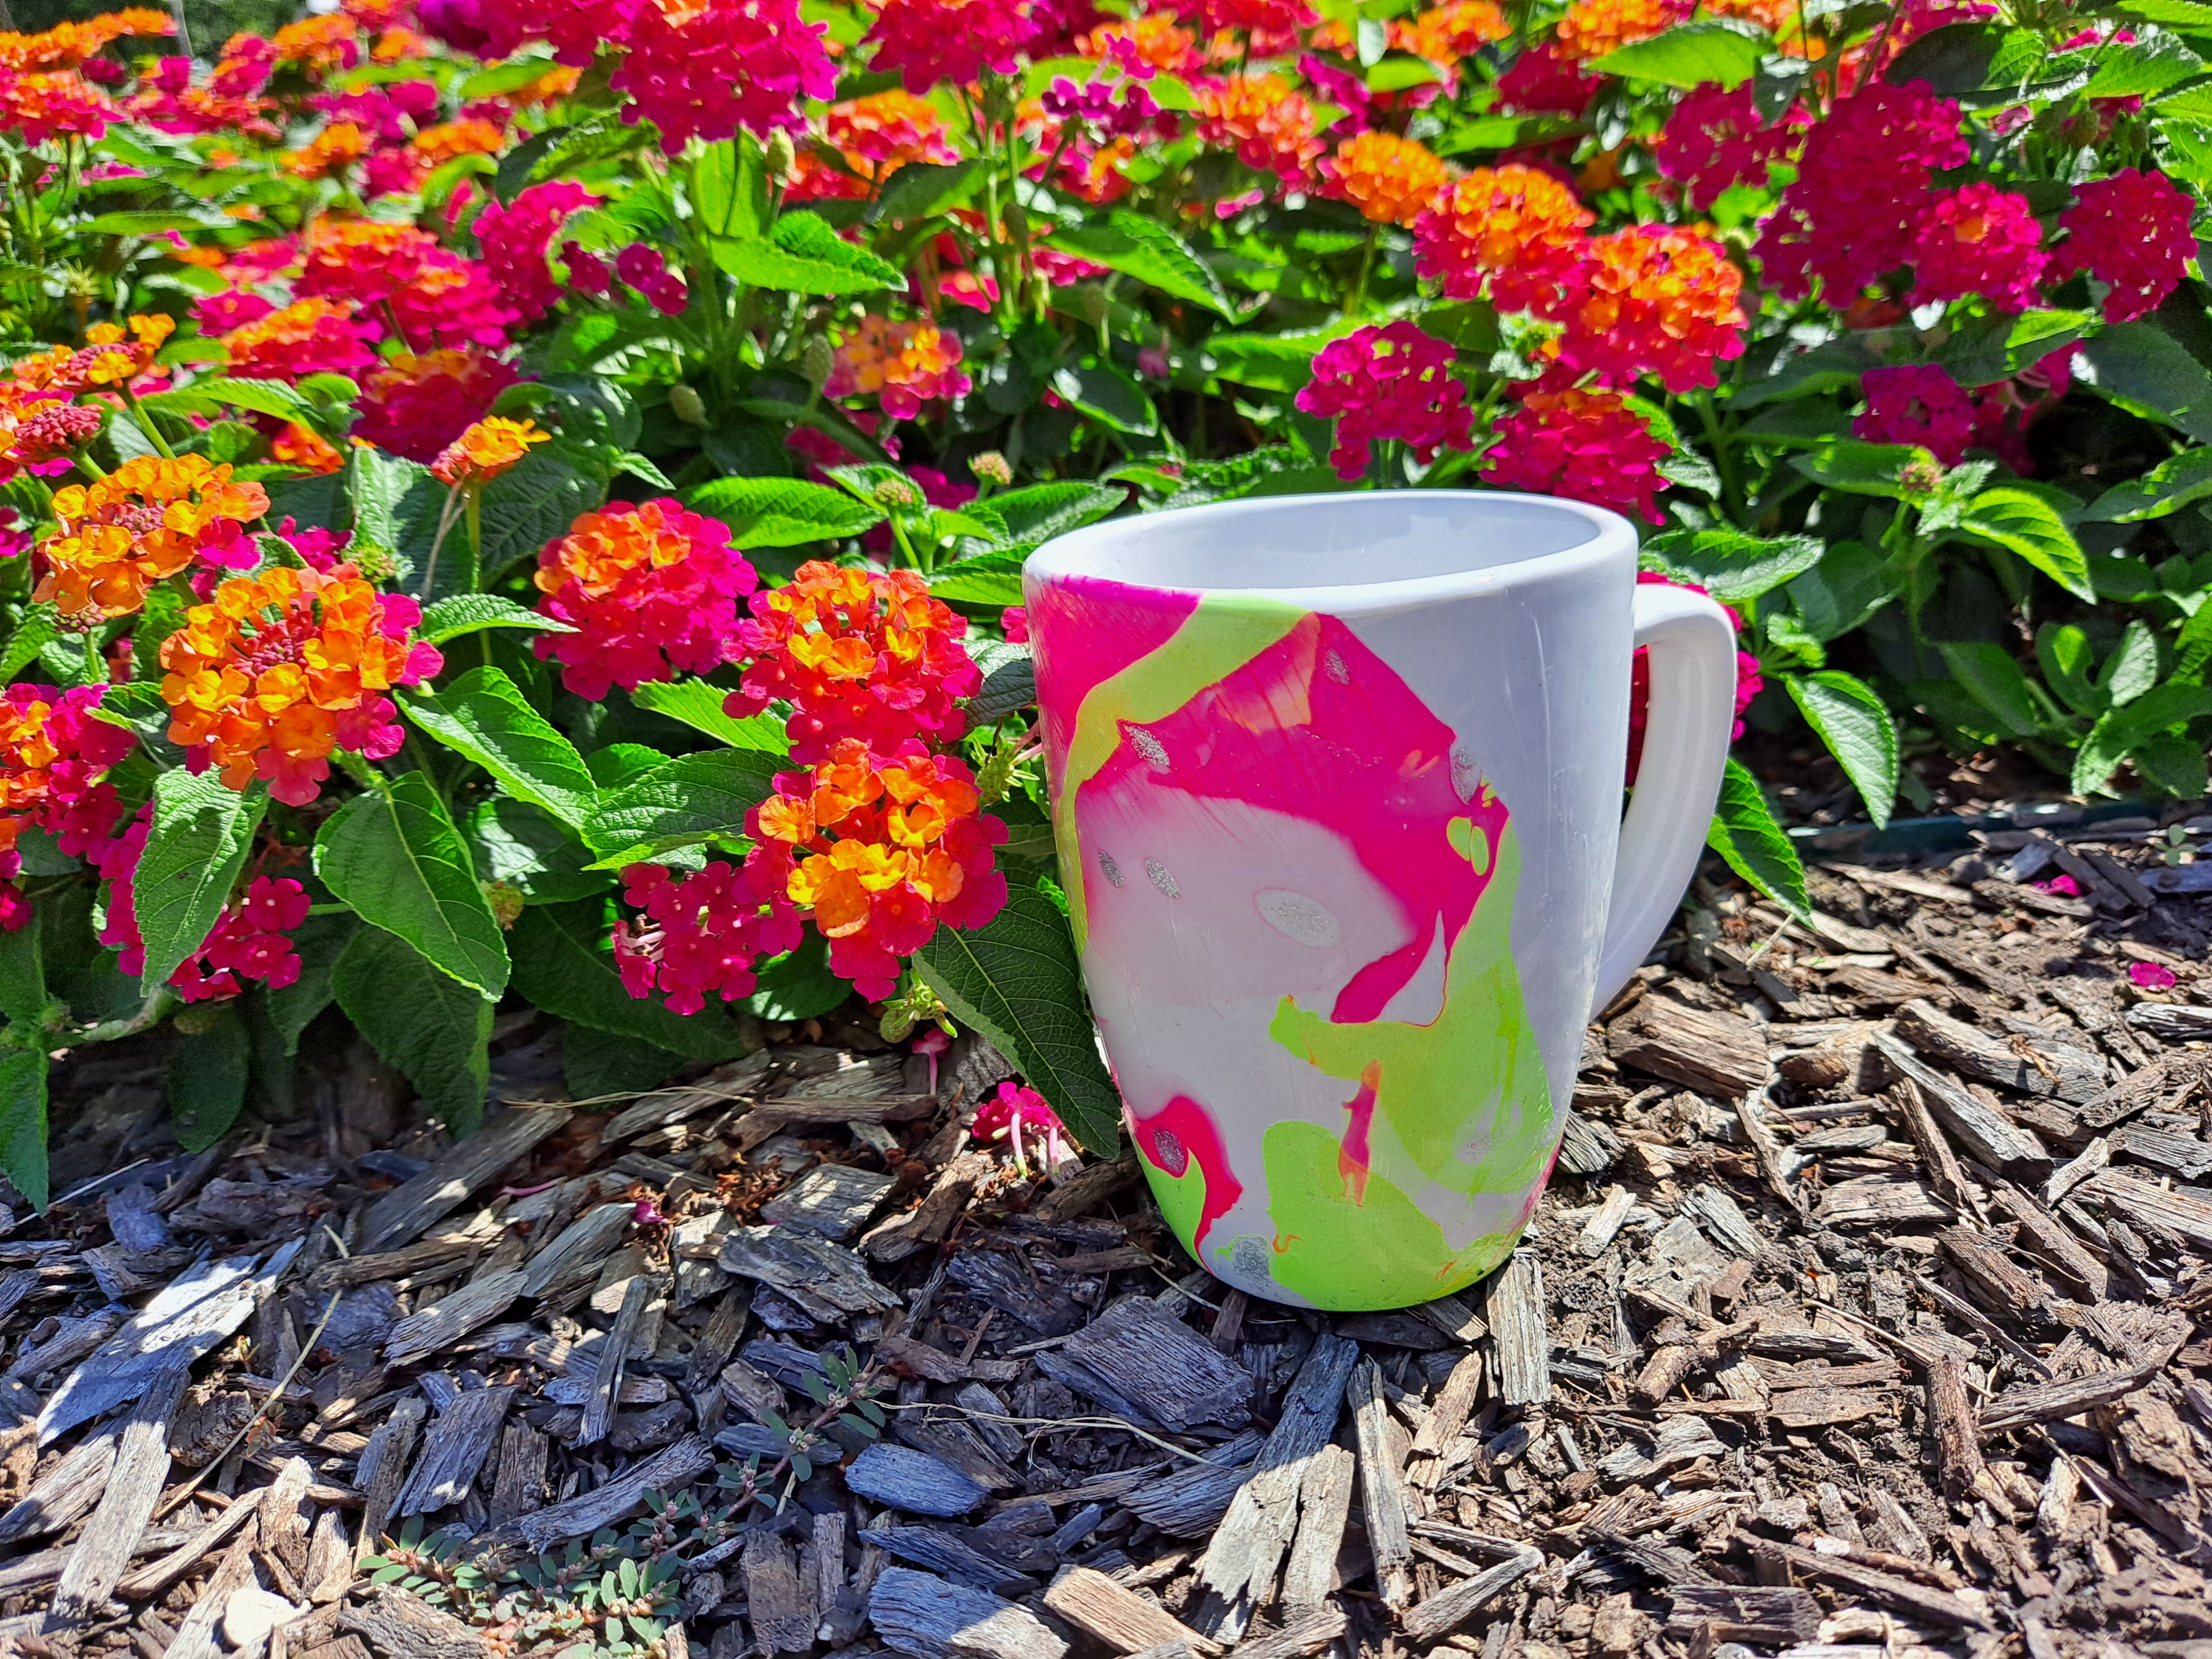 marble pattern on mug, colorful flower bed behind, at the library